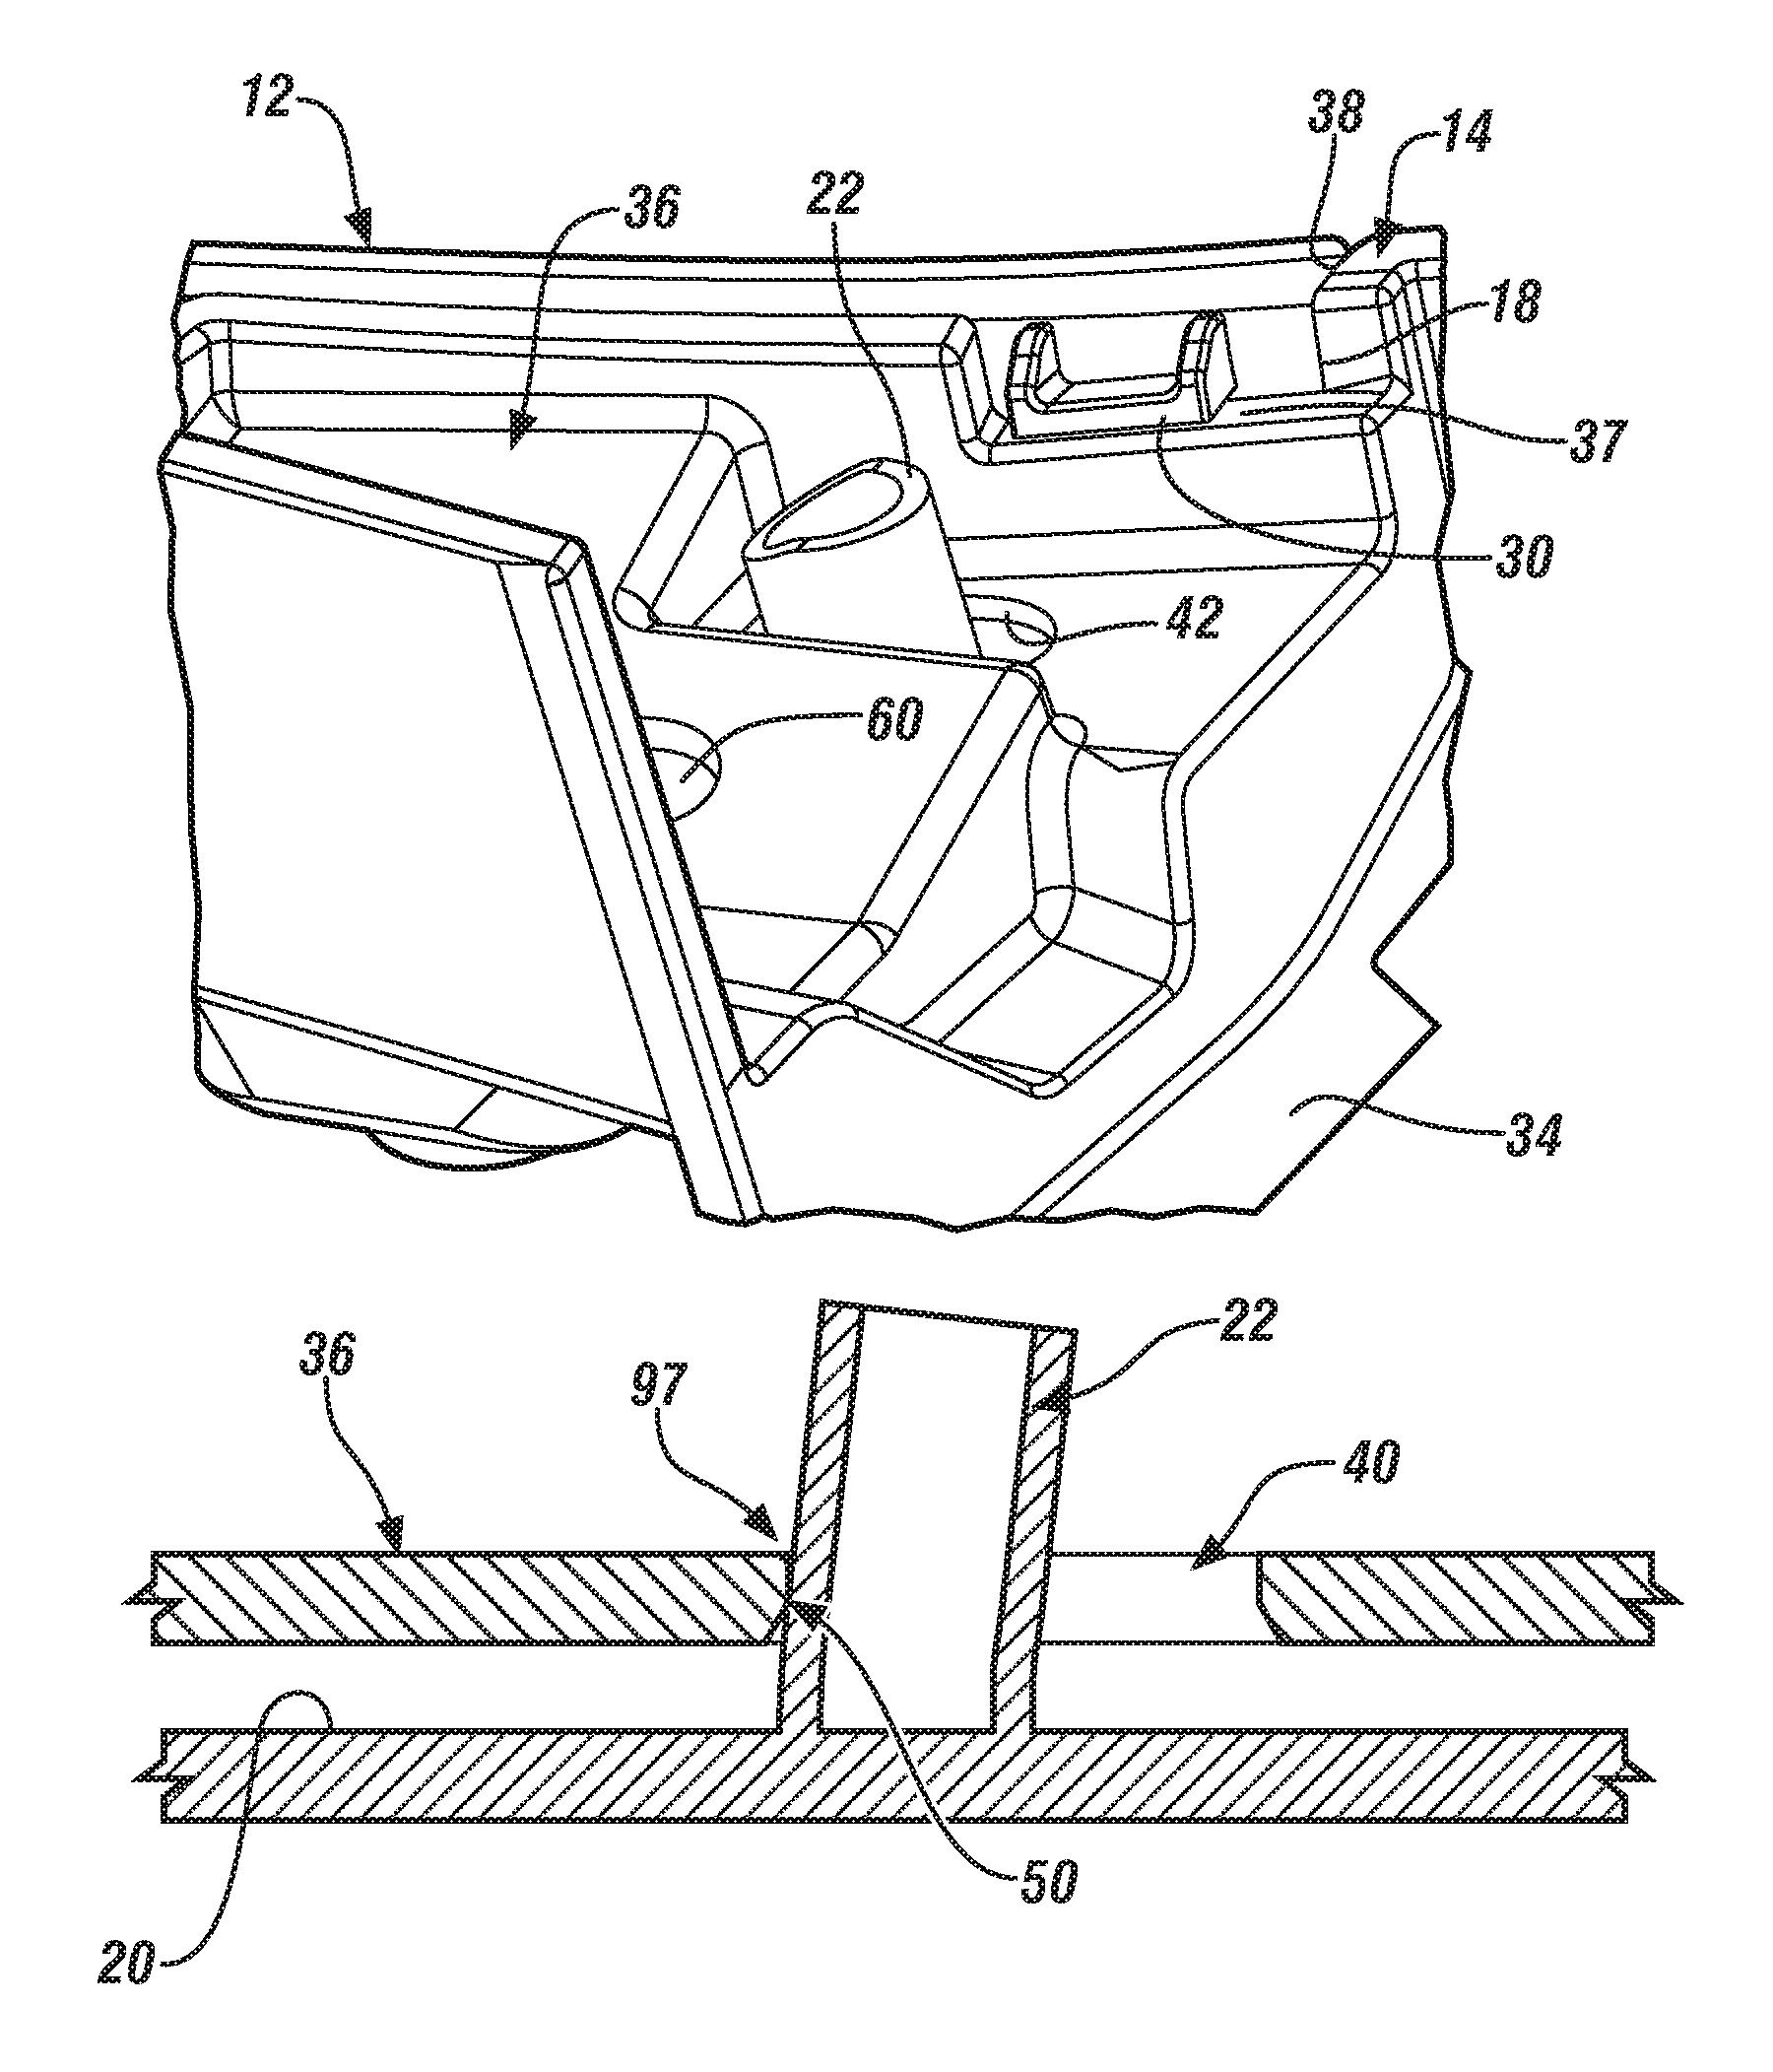 Elastic retaining arrangement for jointed components and method of reducing a gap between jointed components